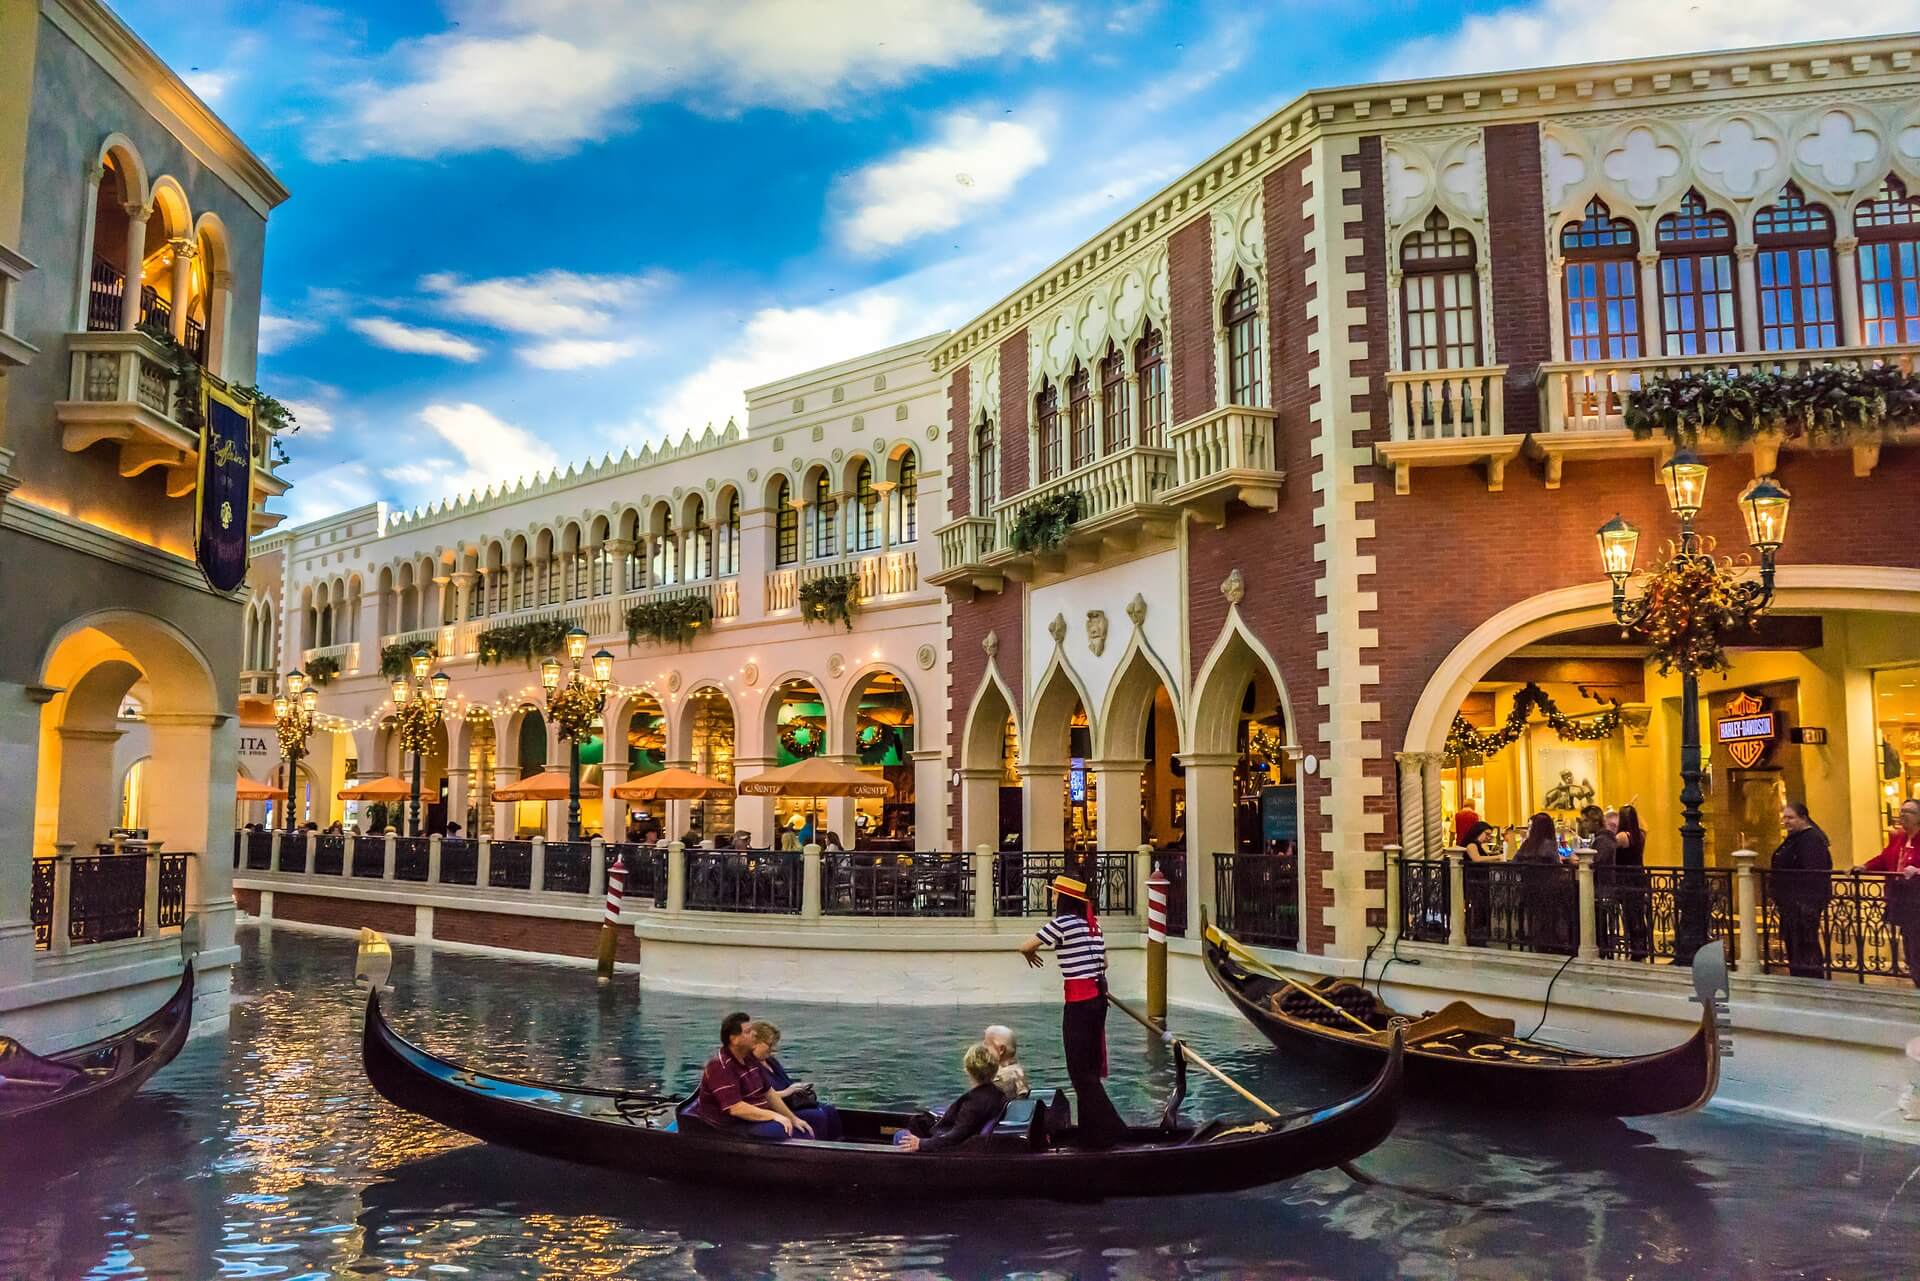 An image of the Venetian Hotel that we recommend booking as one of the best luxury hotels in Las Vegas